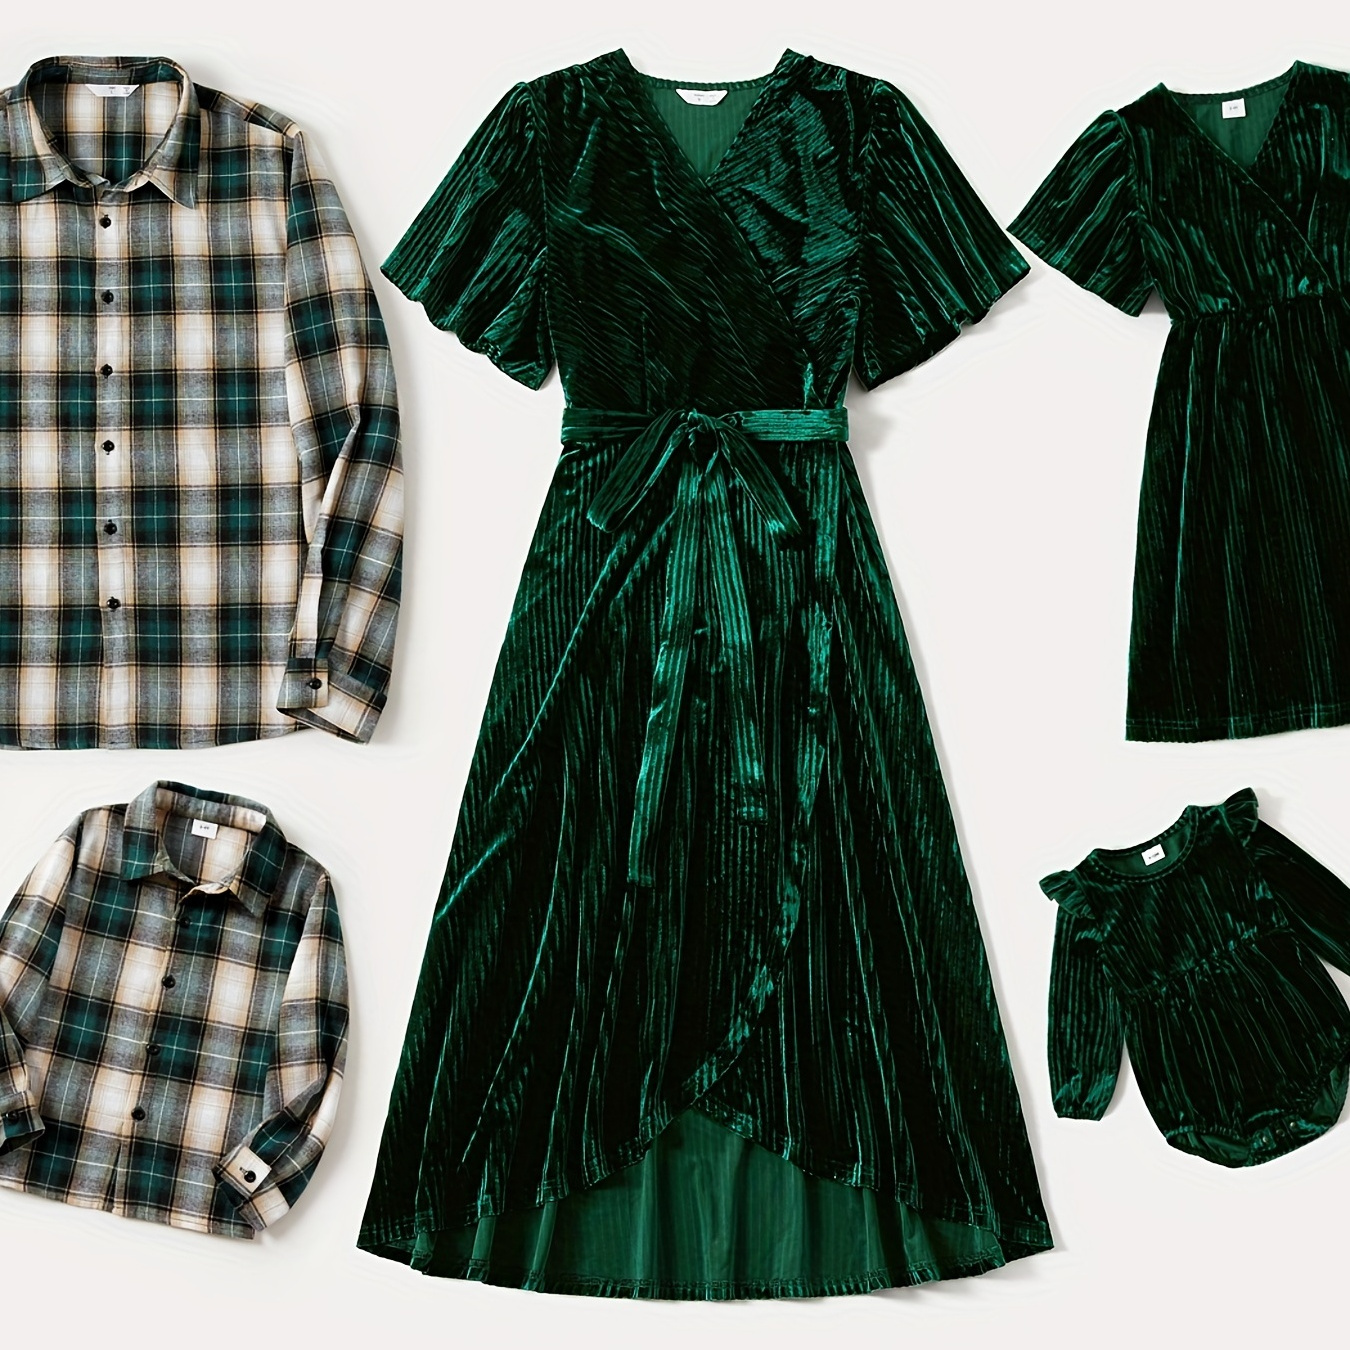 

Green Velvet Matching Family Outfits With Ruffle Sleeves And Plaid Shirts For Dad, Mom, Baby Girls, And Boys